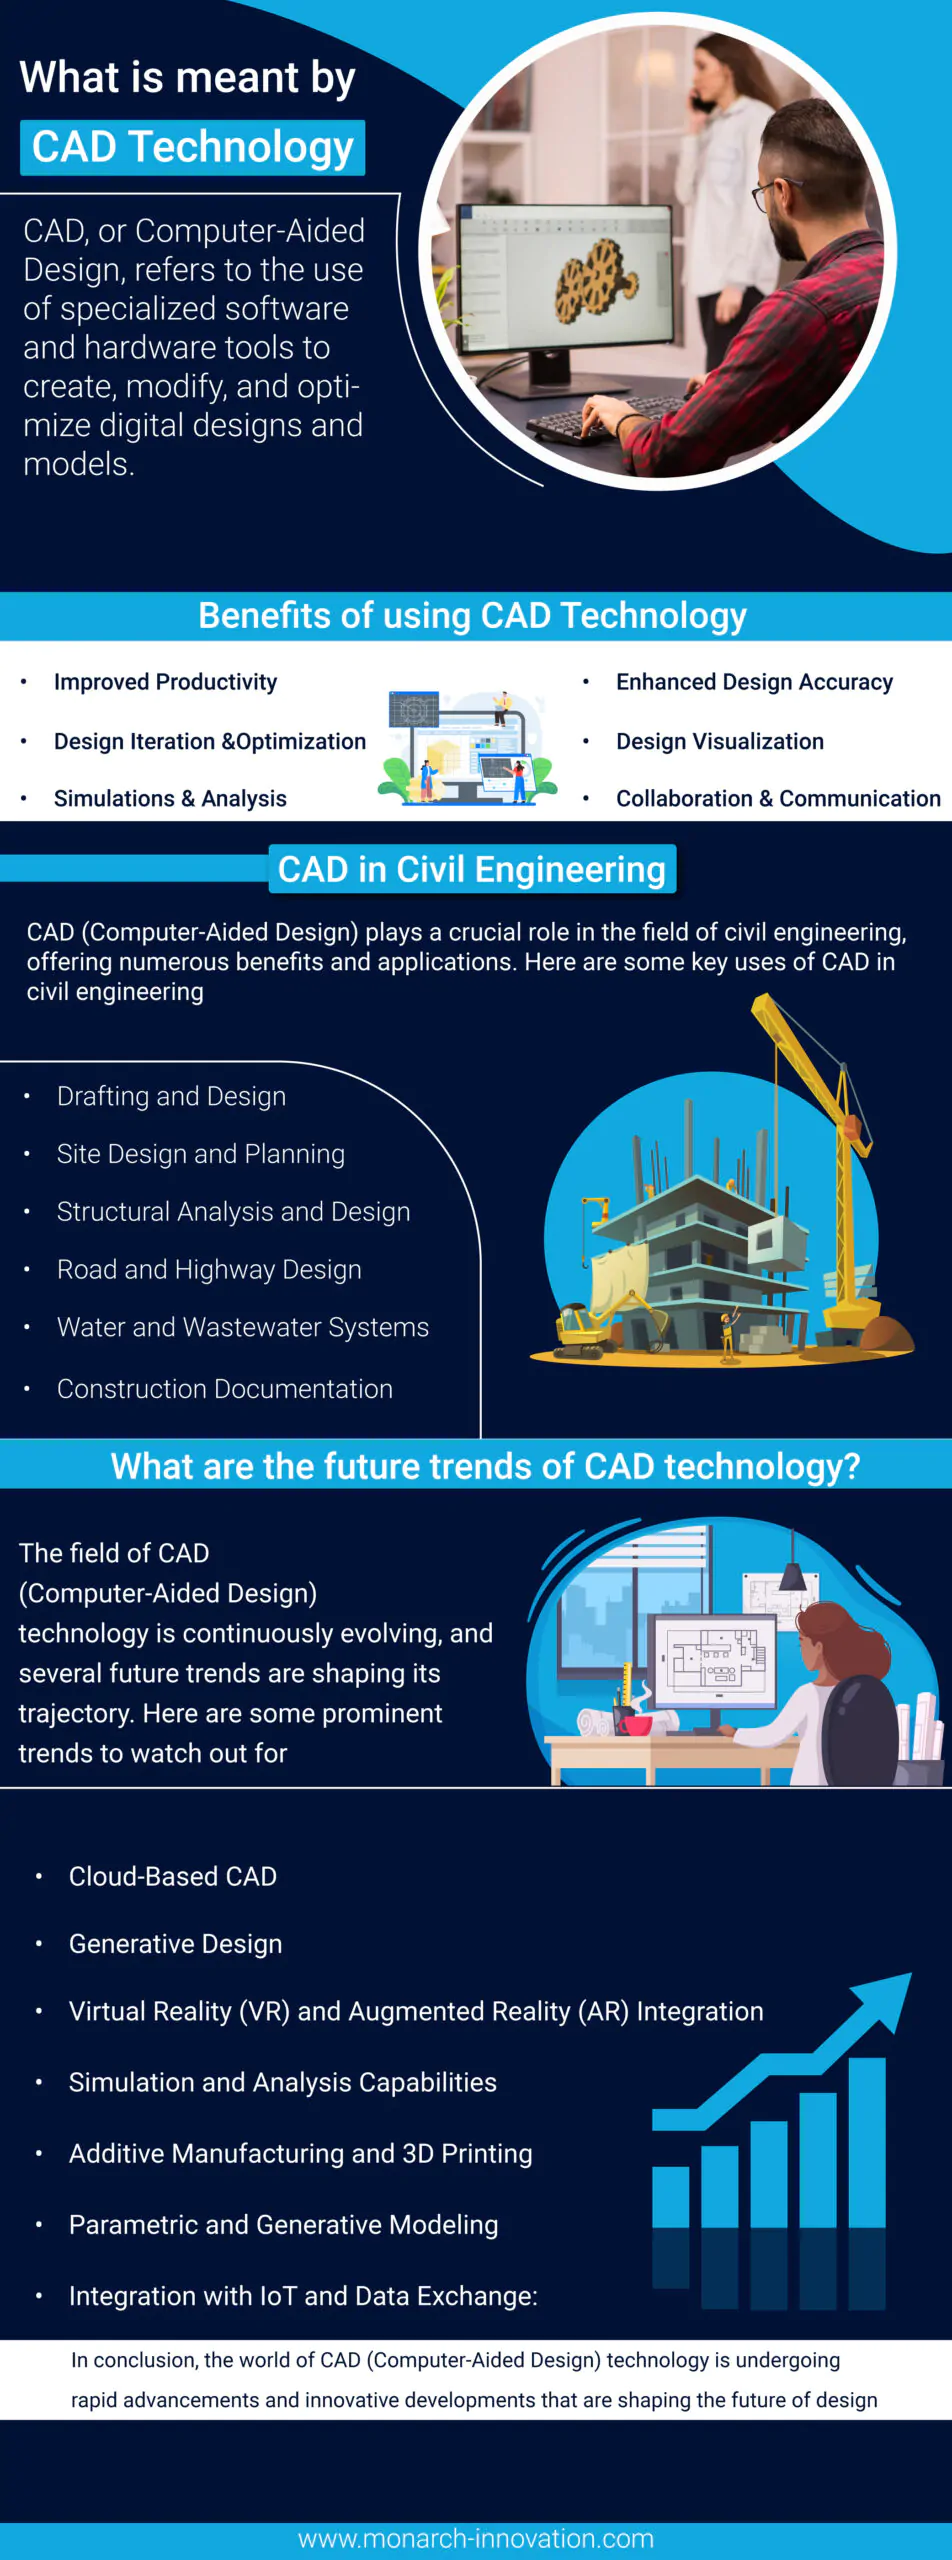 What is meant by CAD Technology?